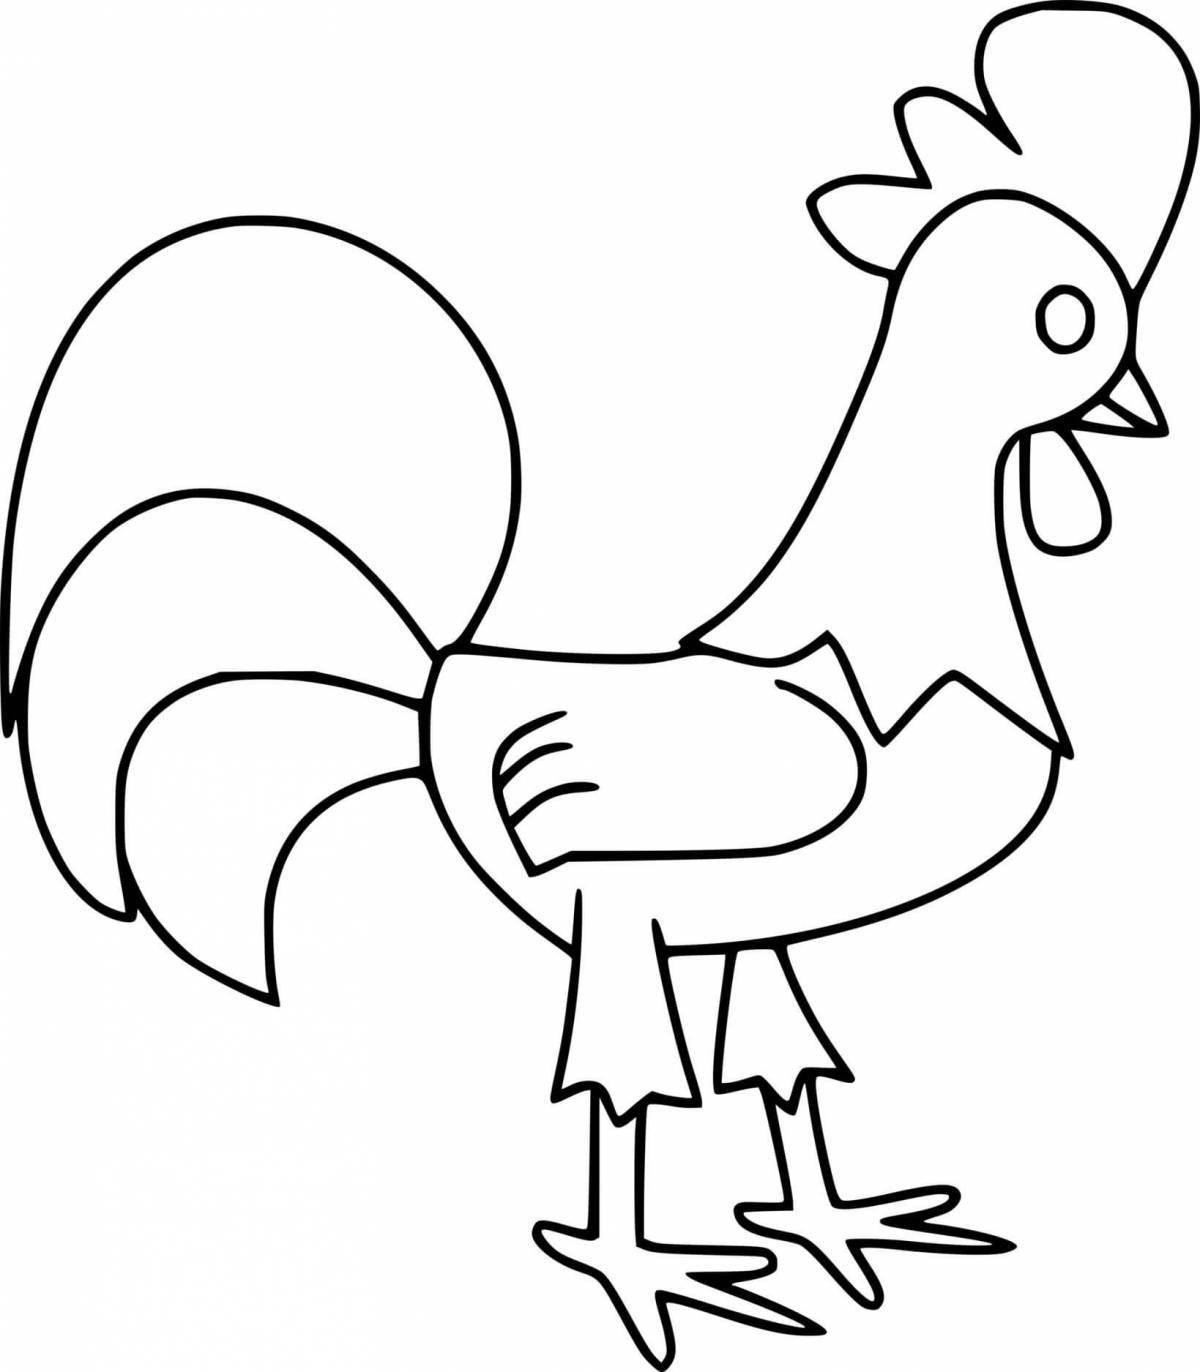 Children's rooster coloring page